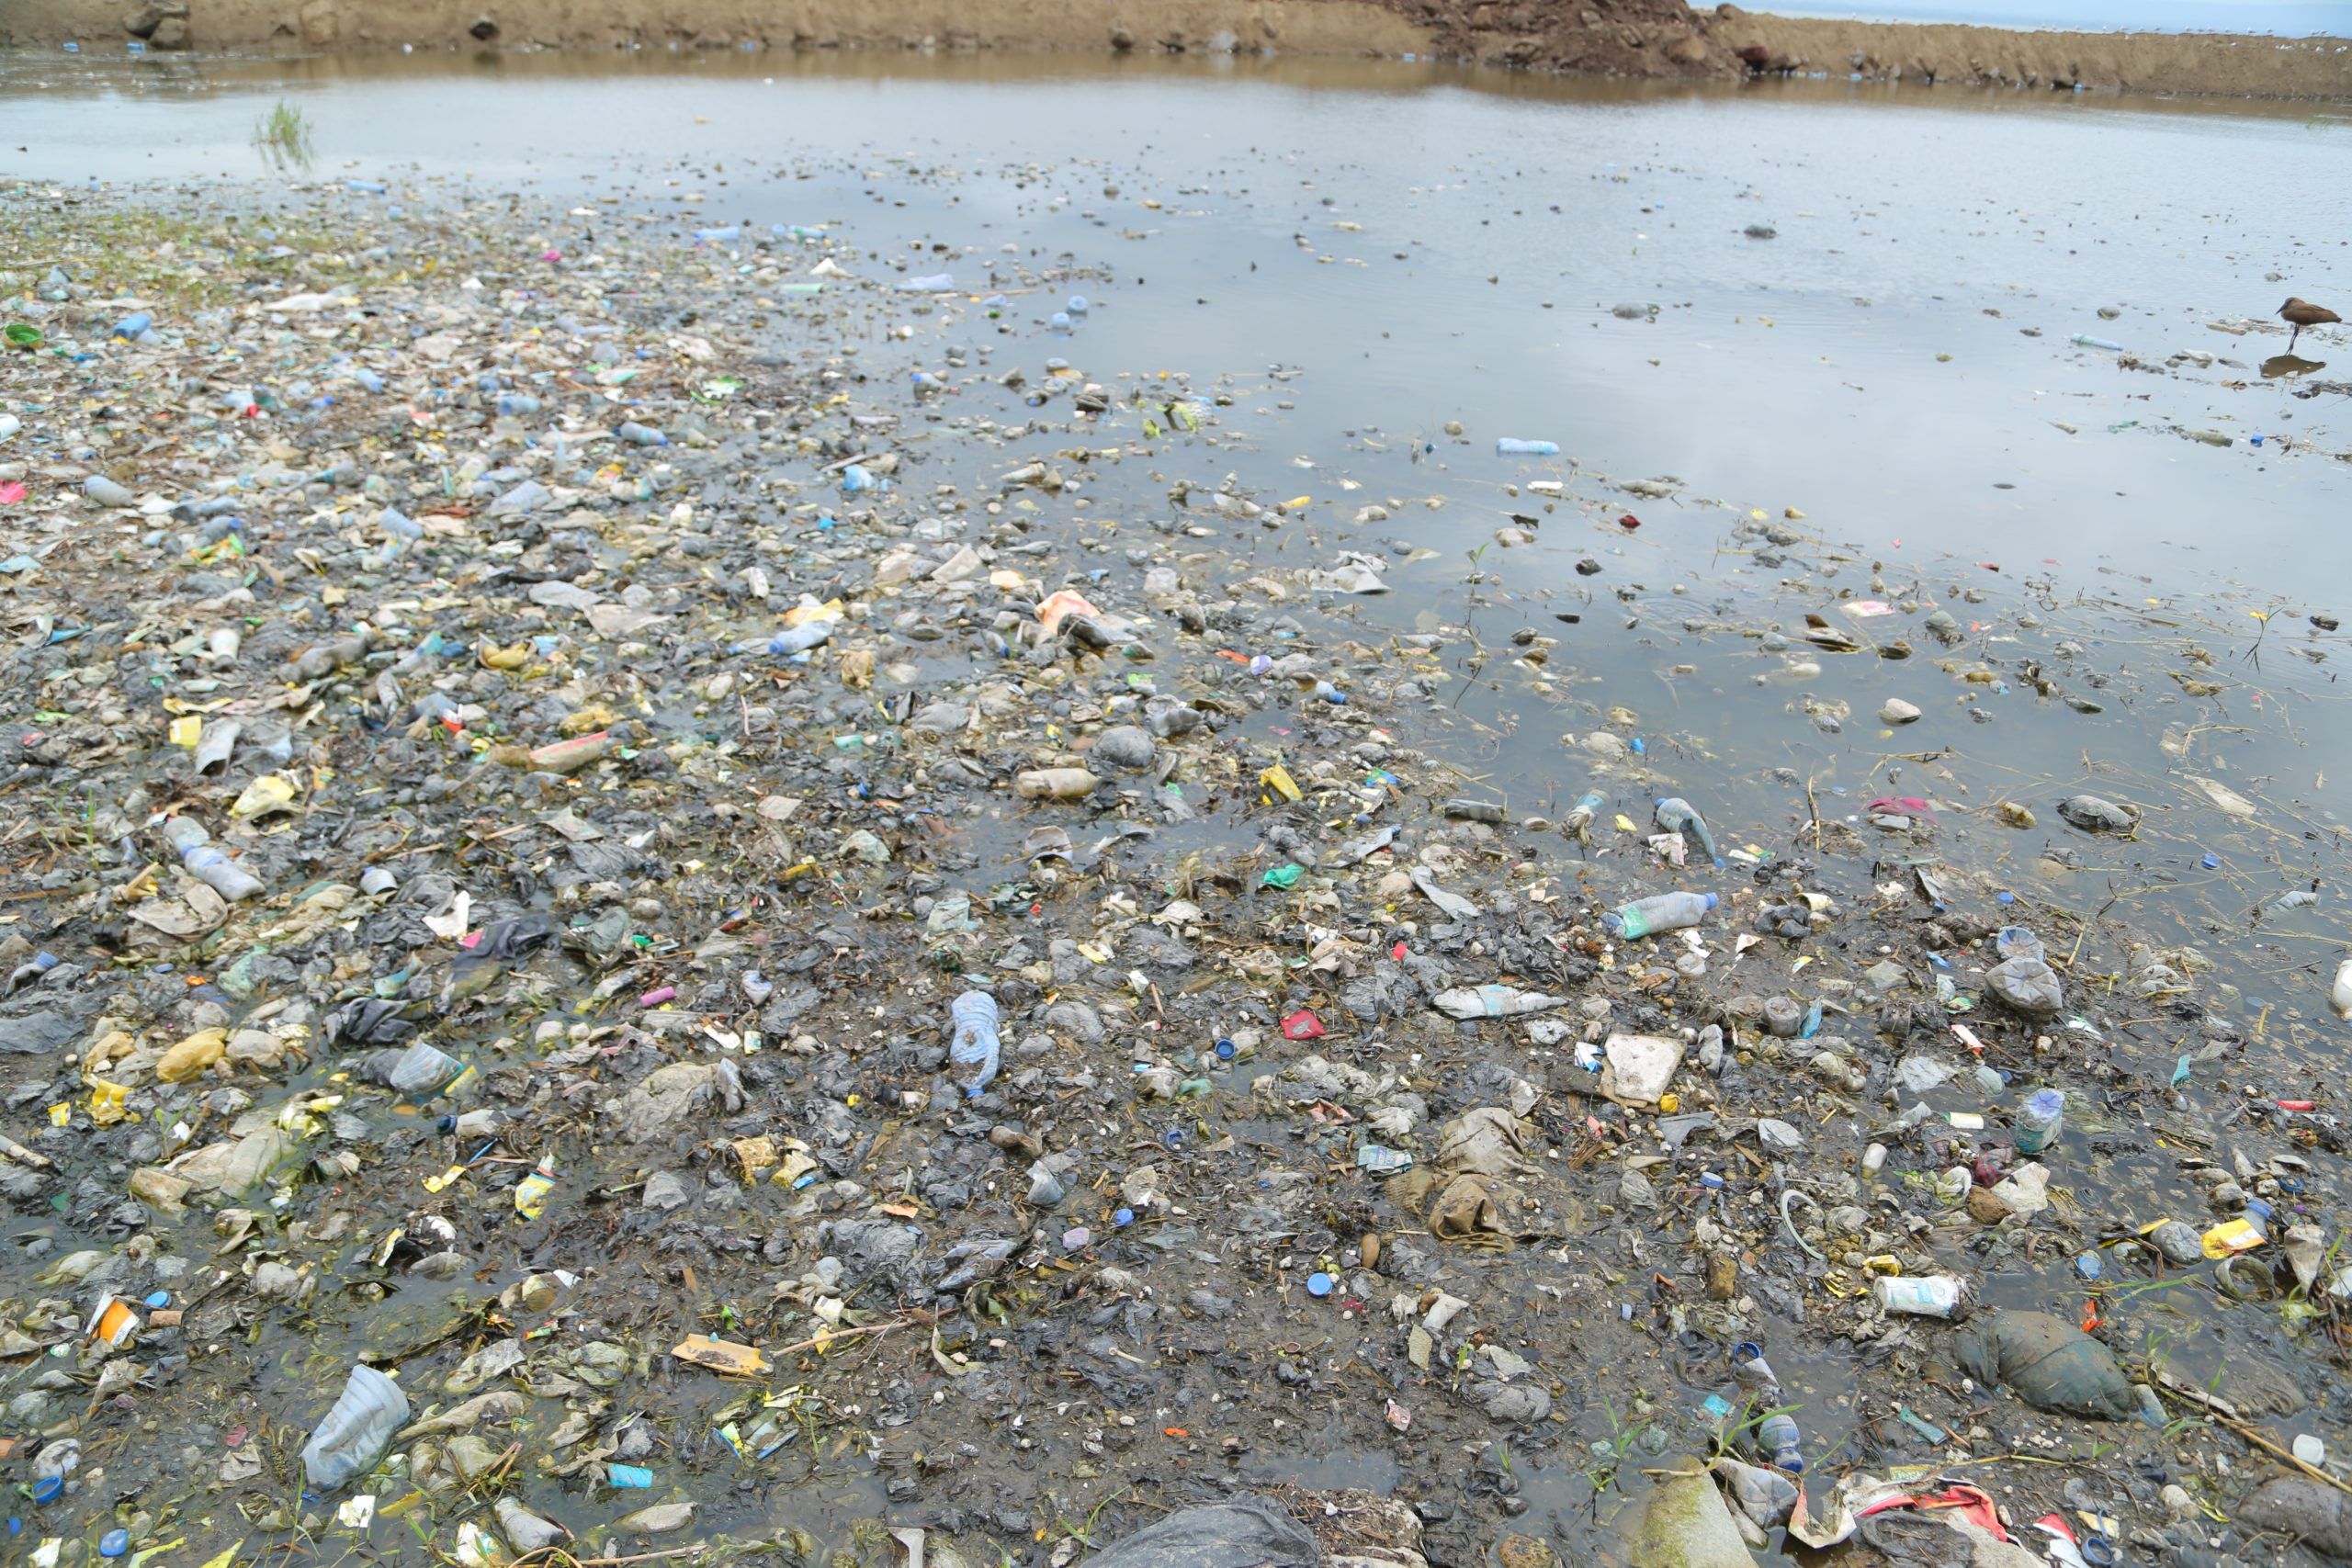 Littered plastic polluting water bodies.